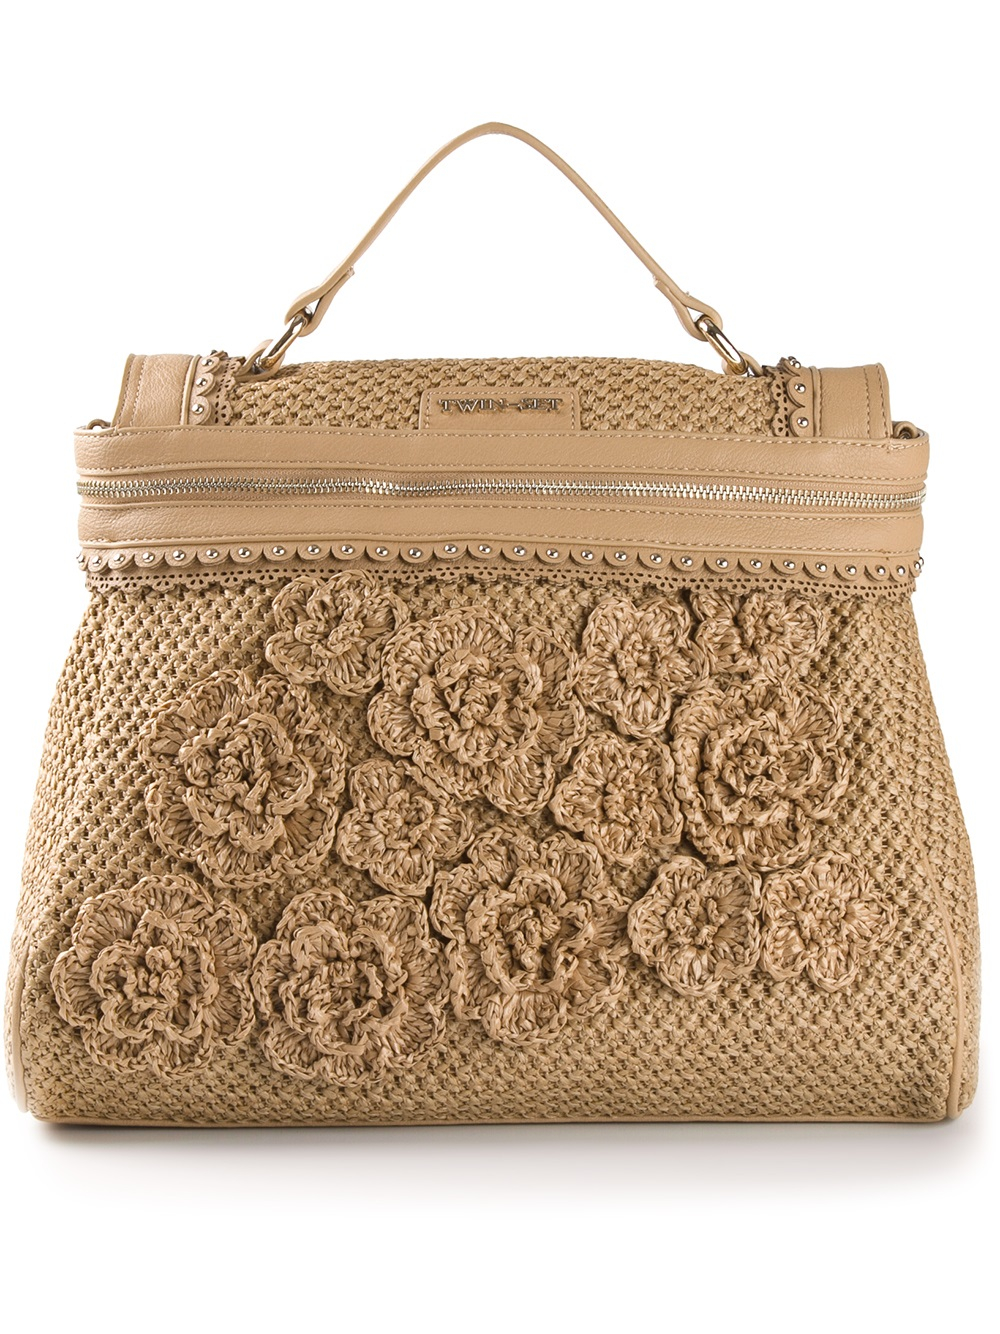 Twin Set Floral Crochet Tote Bag in Brown - Lyst